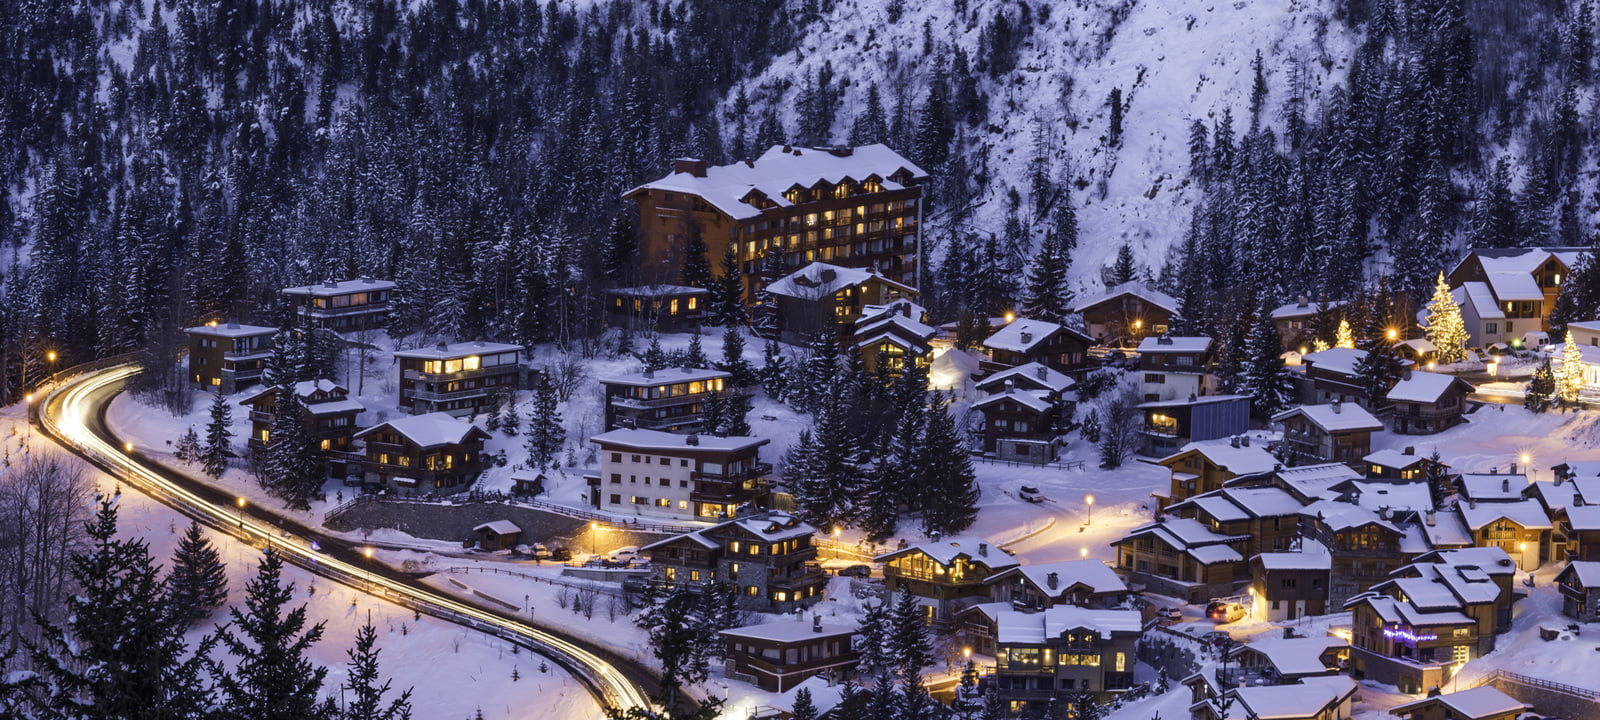 Courchevel has everything for a great ski holiday